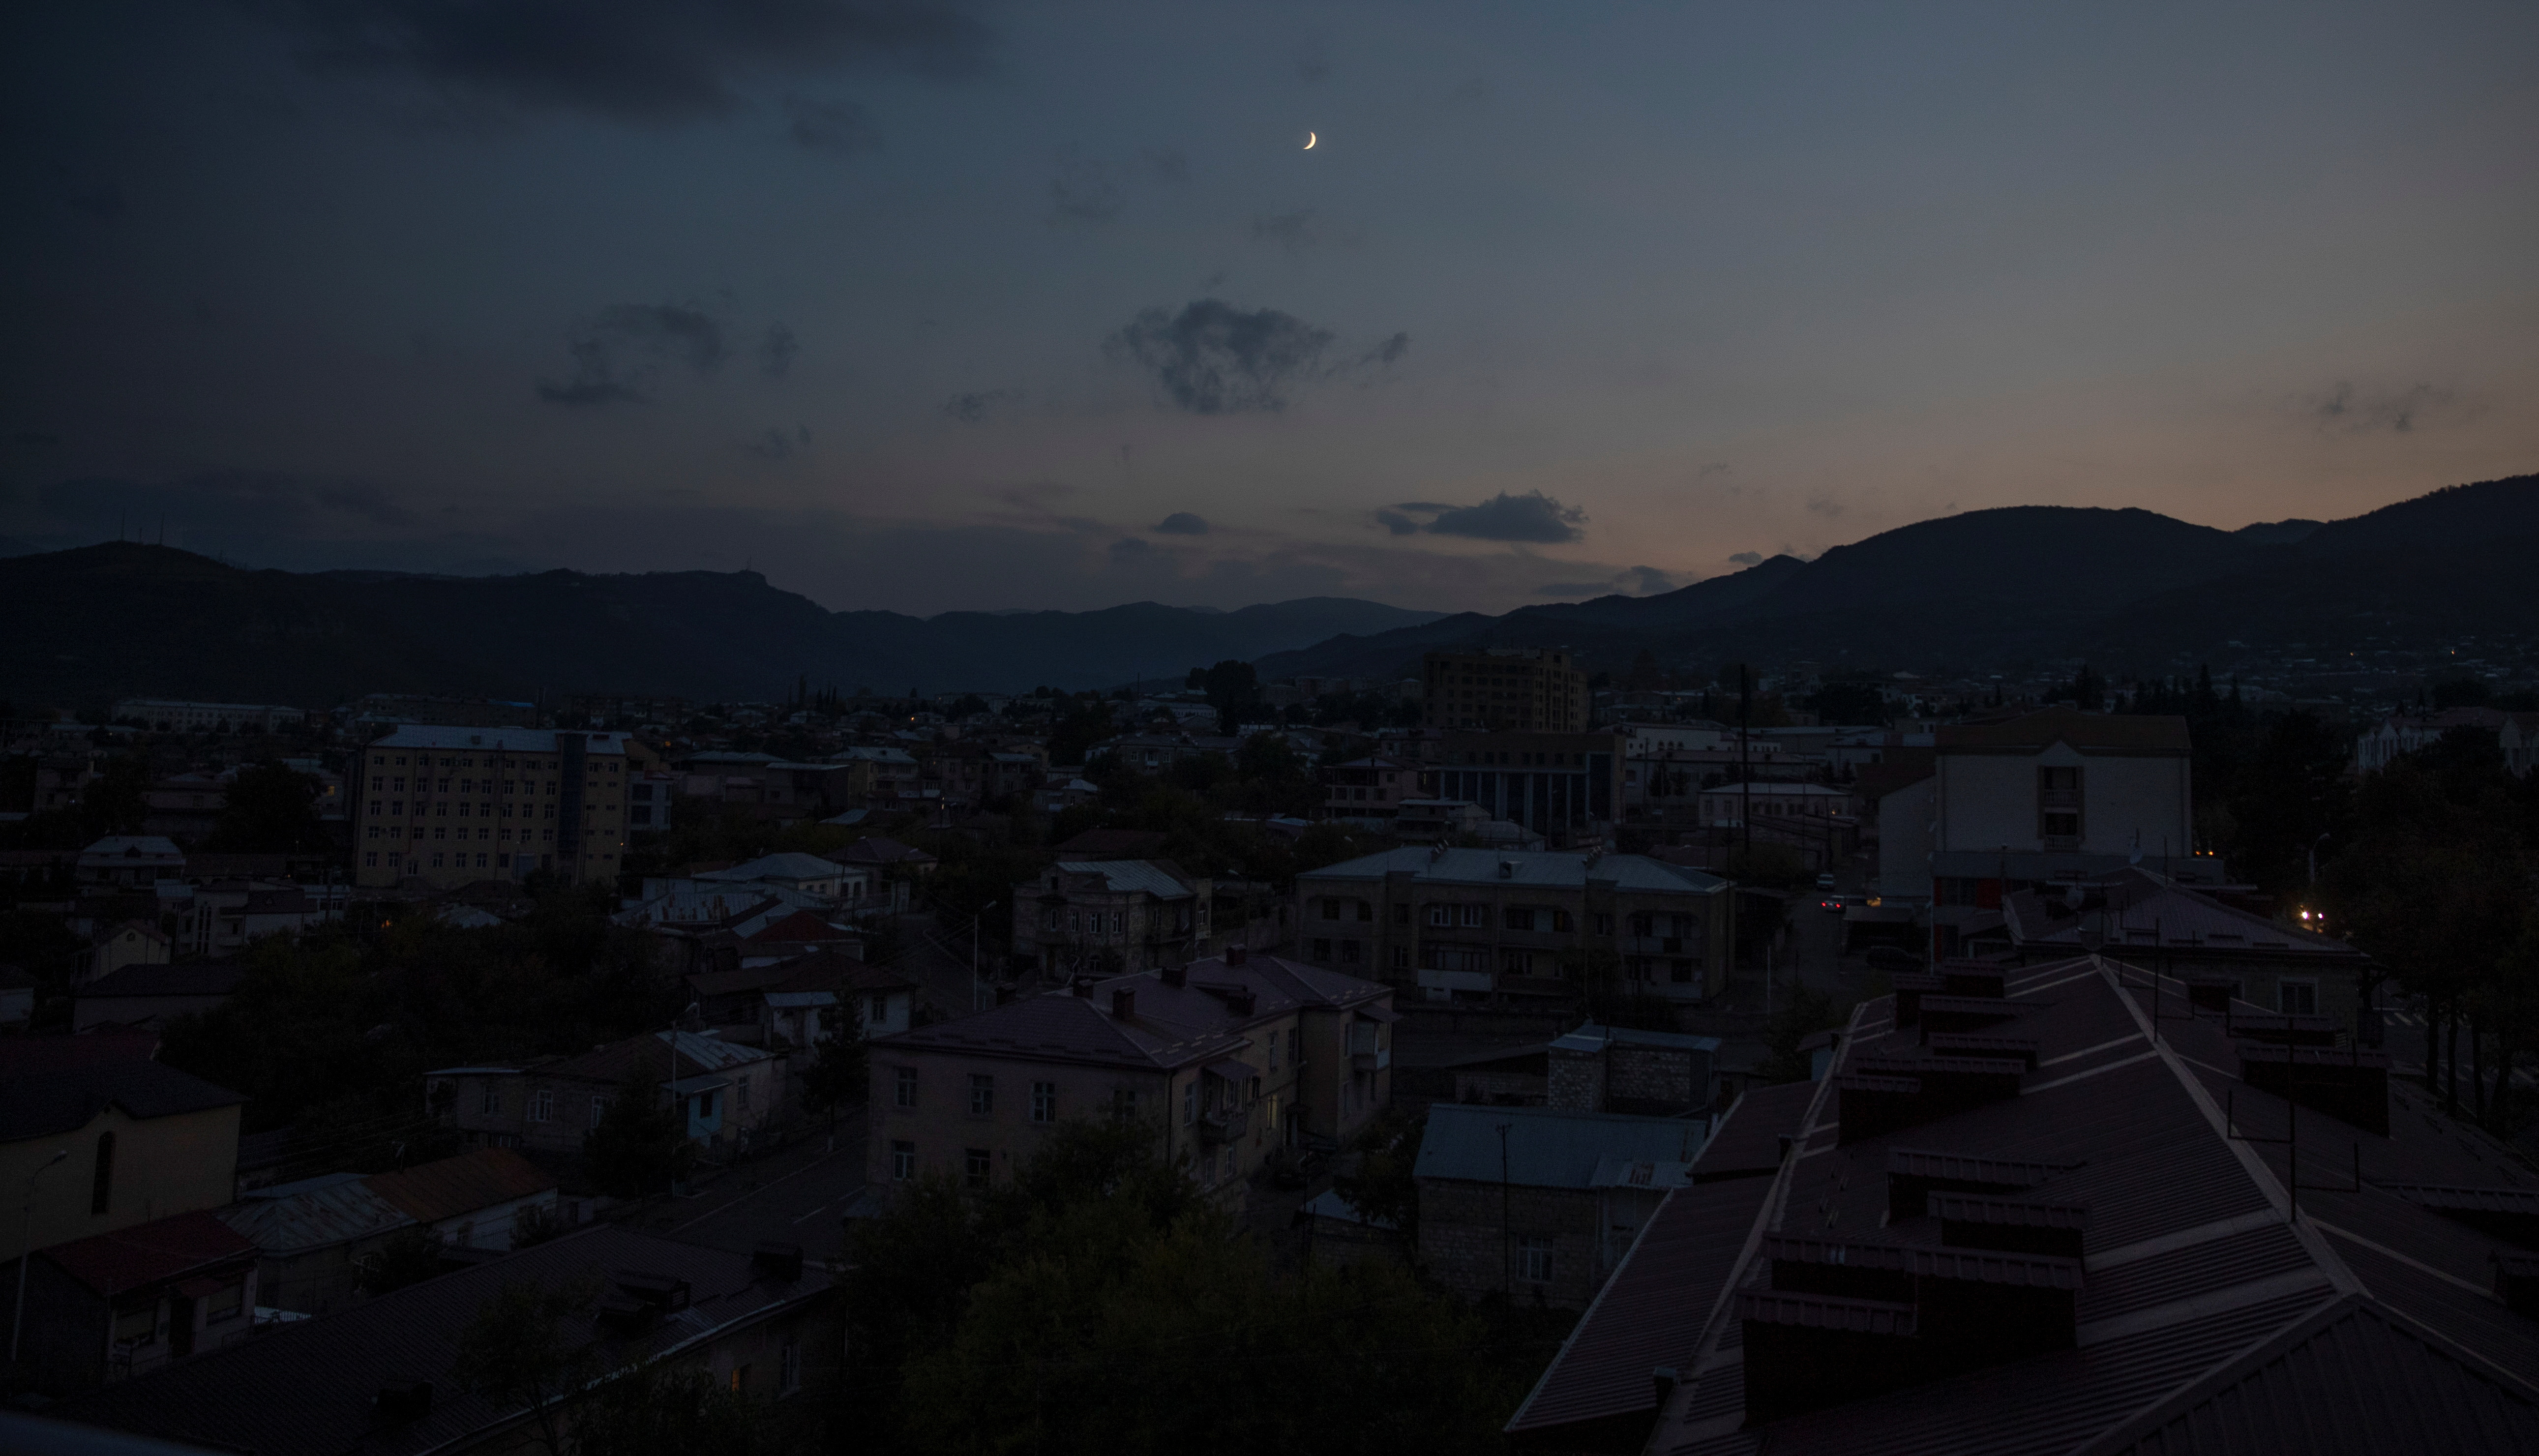 A view shows the city of Stepanakert